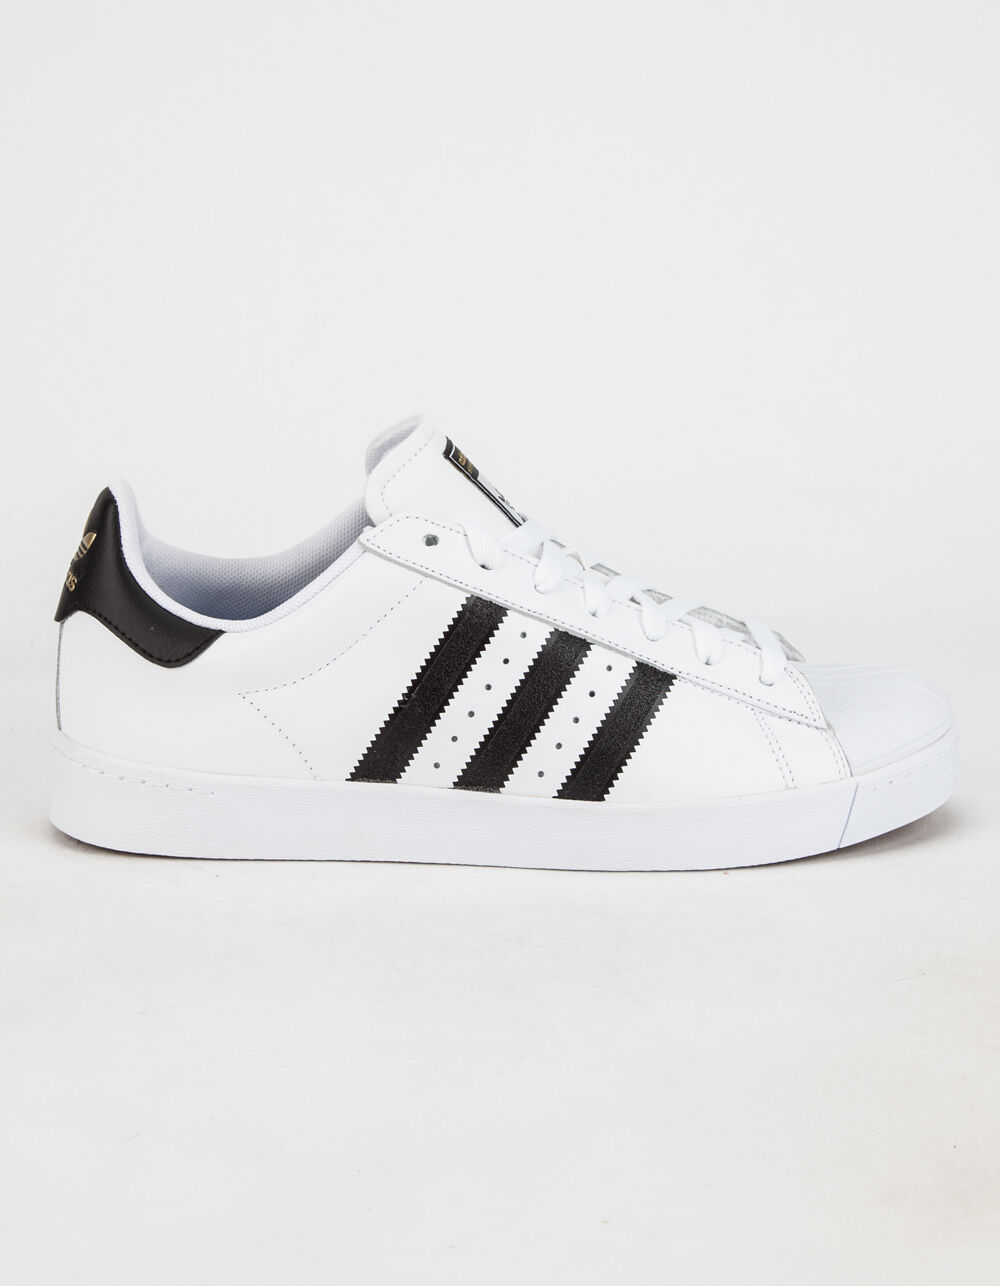 ADIDAS Superstar Vulc ADV Shoes image number 0